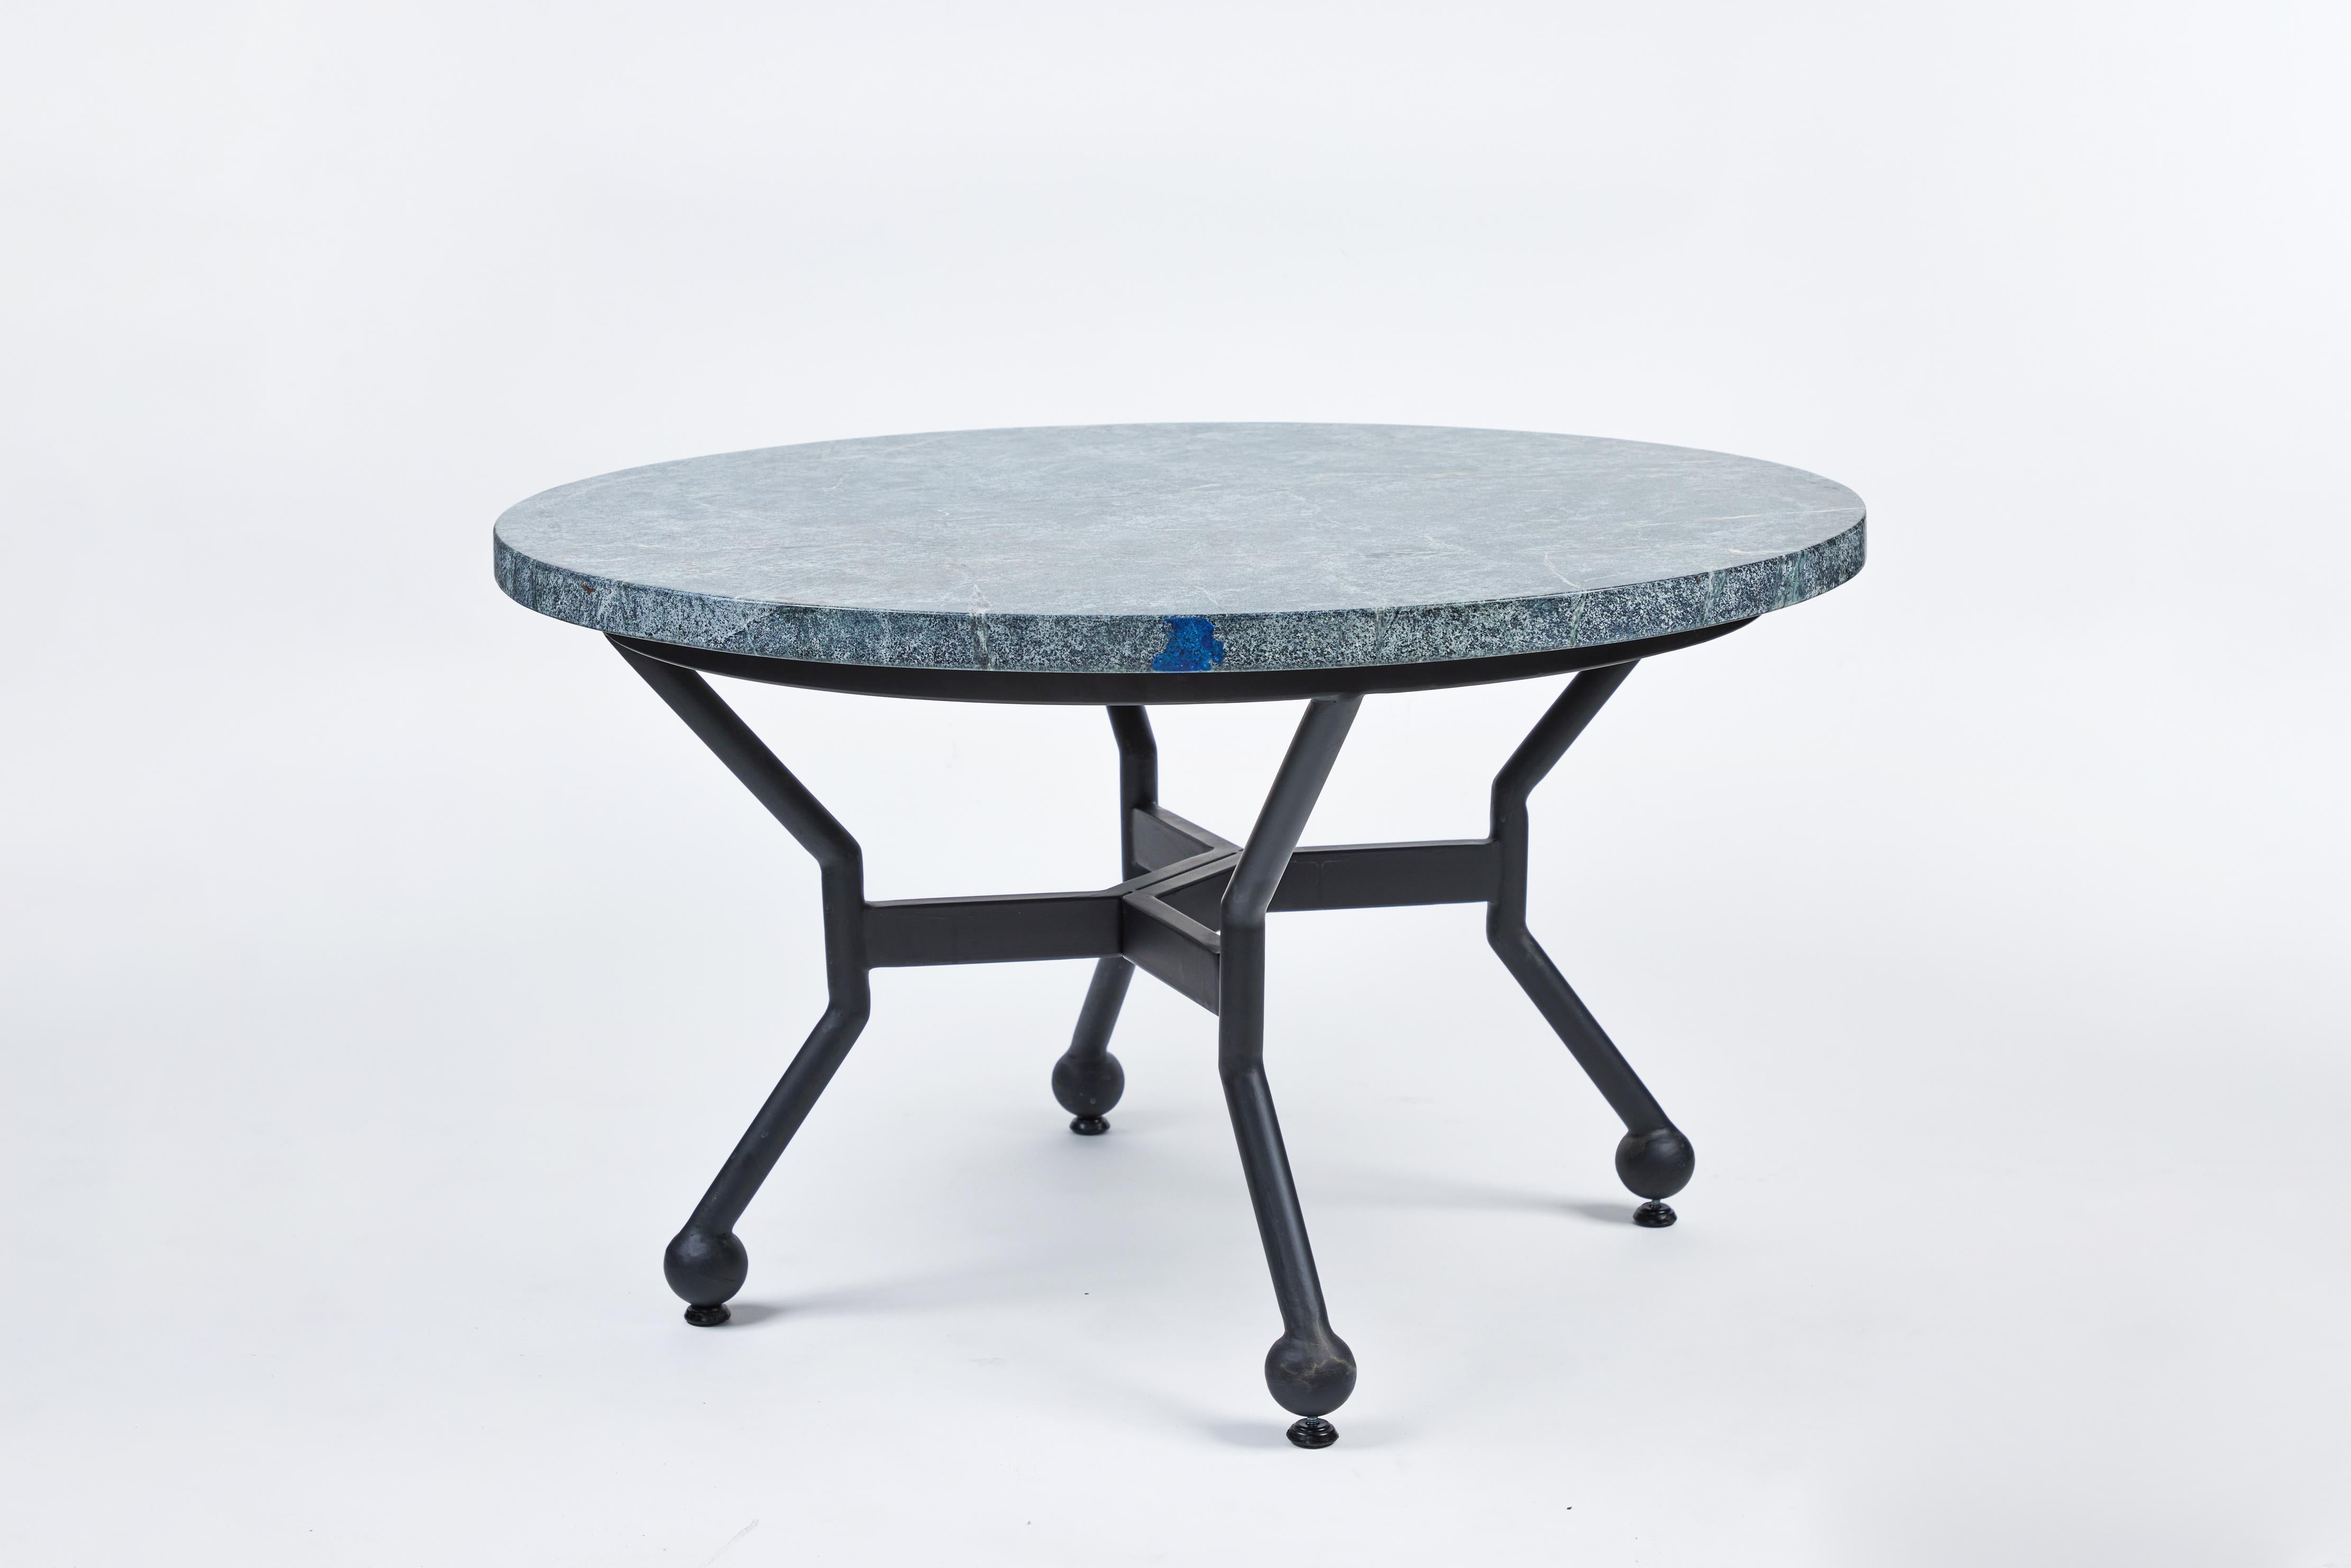 This striking custom round two-piece iron coffee table has an attractive new soapstone top with beautiful rounded edges and rich natural markings. It has been powder coated in a rich black finish to complement the deep green tones of the natural